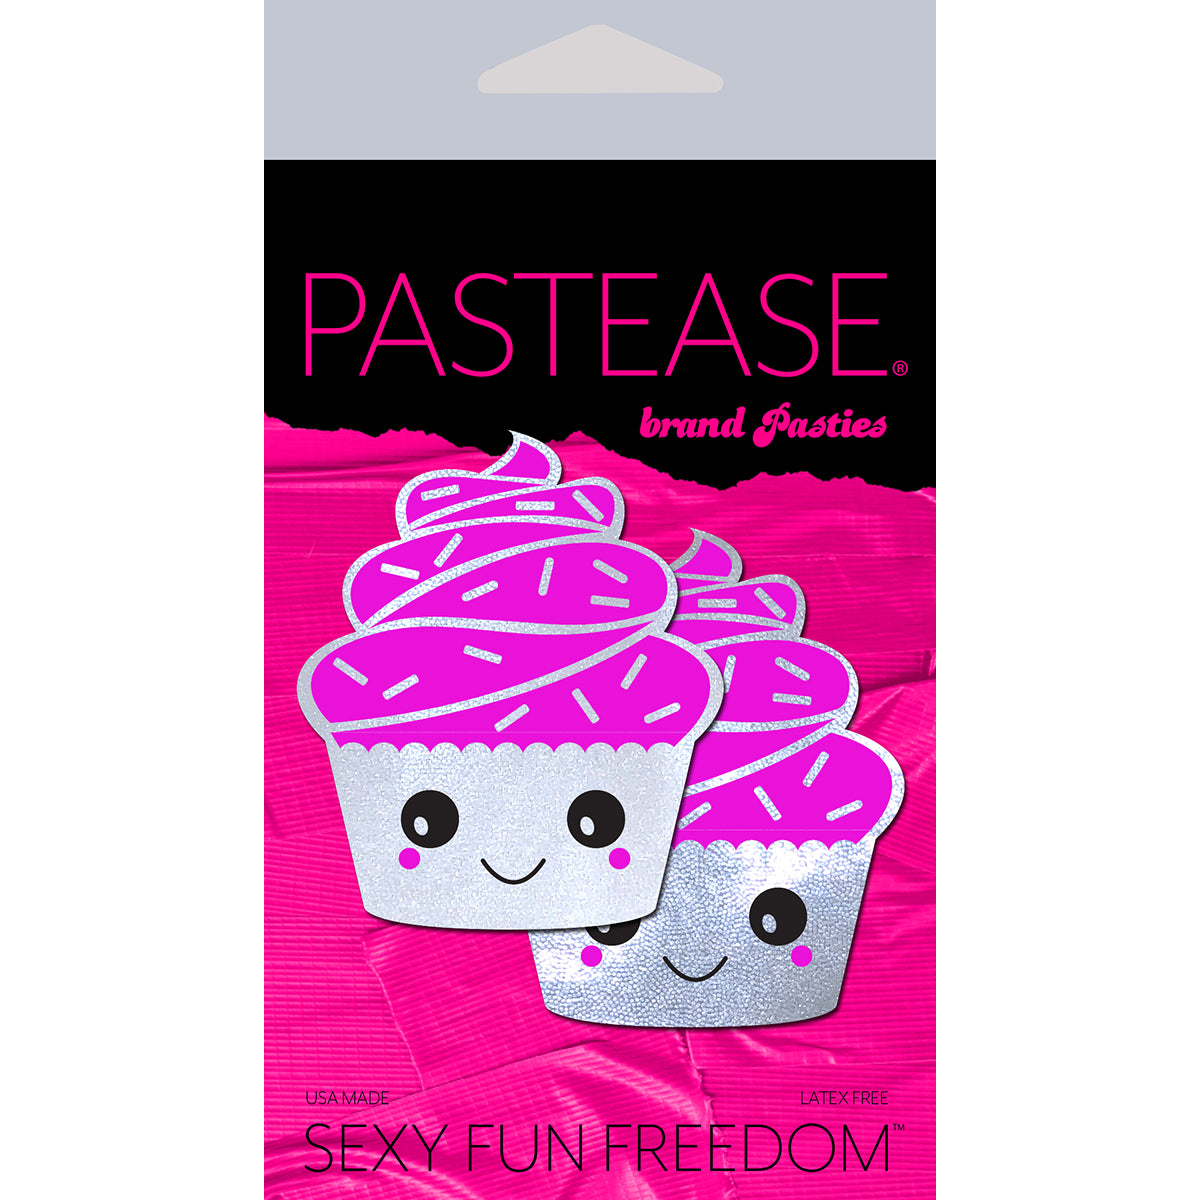 Pastease Smiley Cupcakes Intimates Adult Boutique